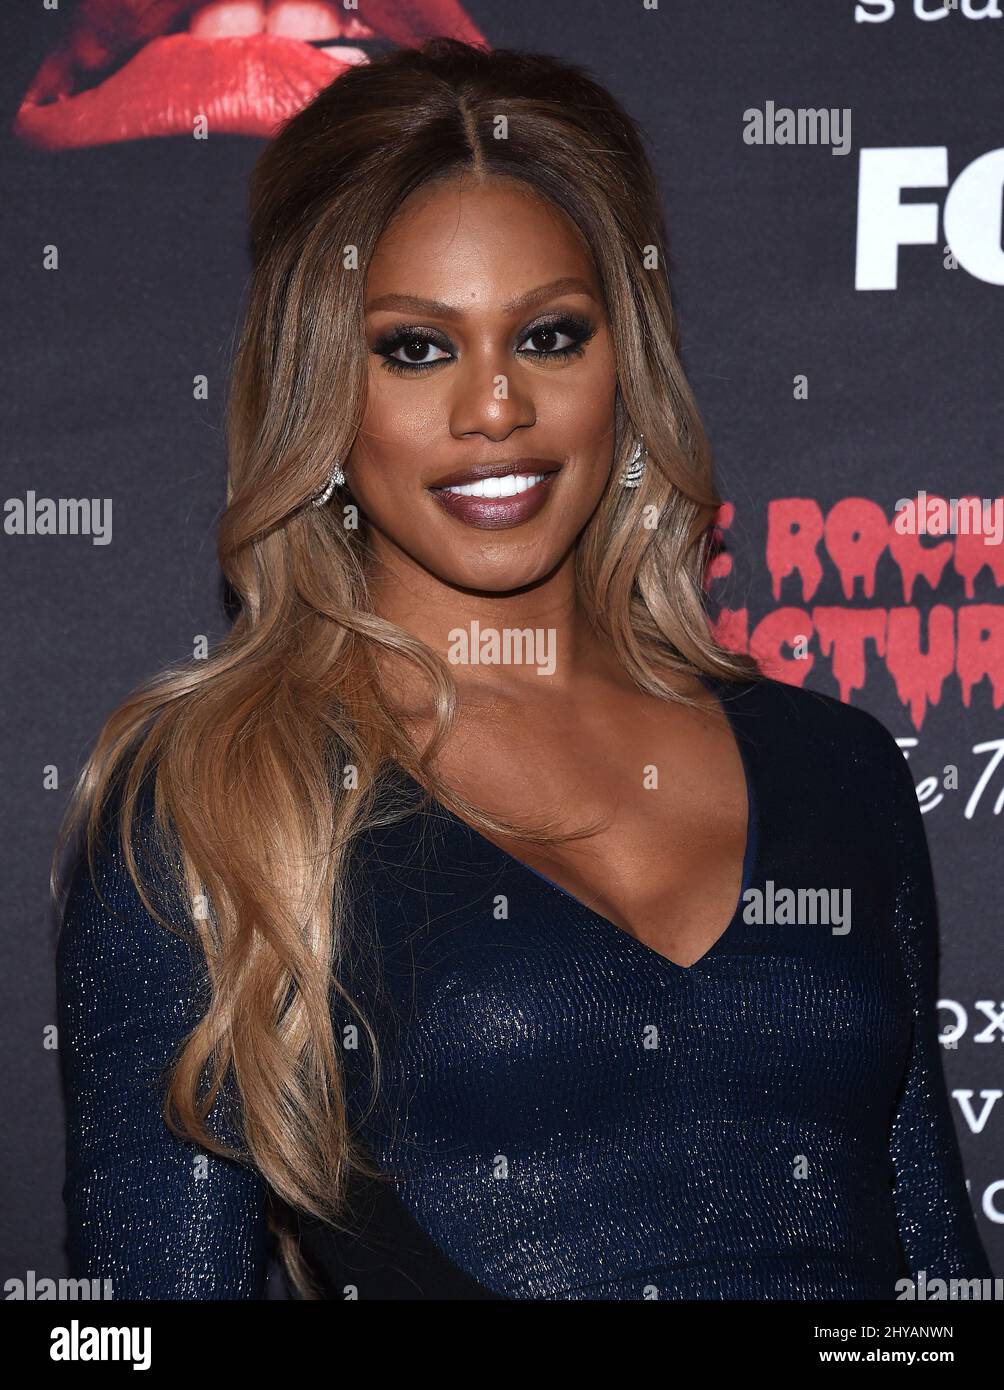 Laverne Cox attending the Rocky Horror Picture Show: Let's Do The Time Warp Again Premiere held at The Roxy, in Los Angeles, California. Stock Photo